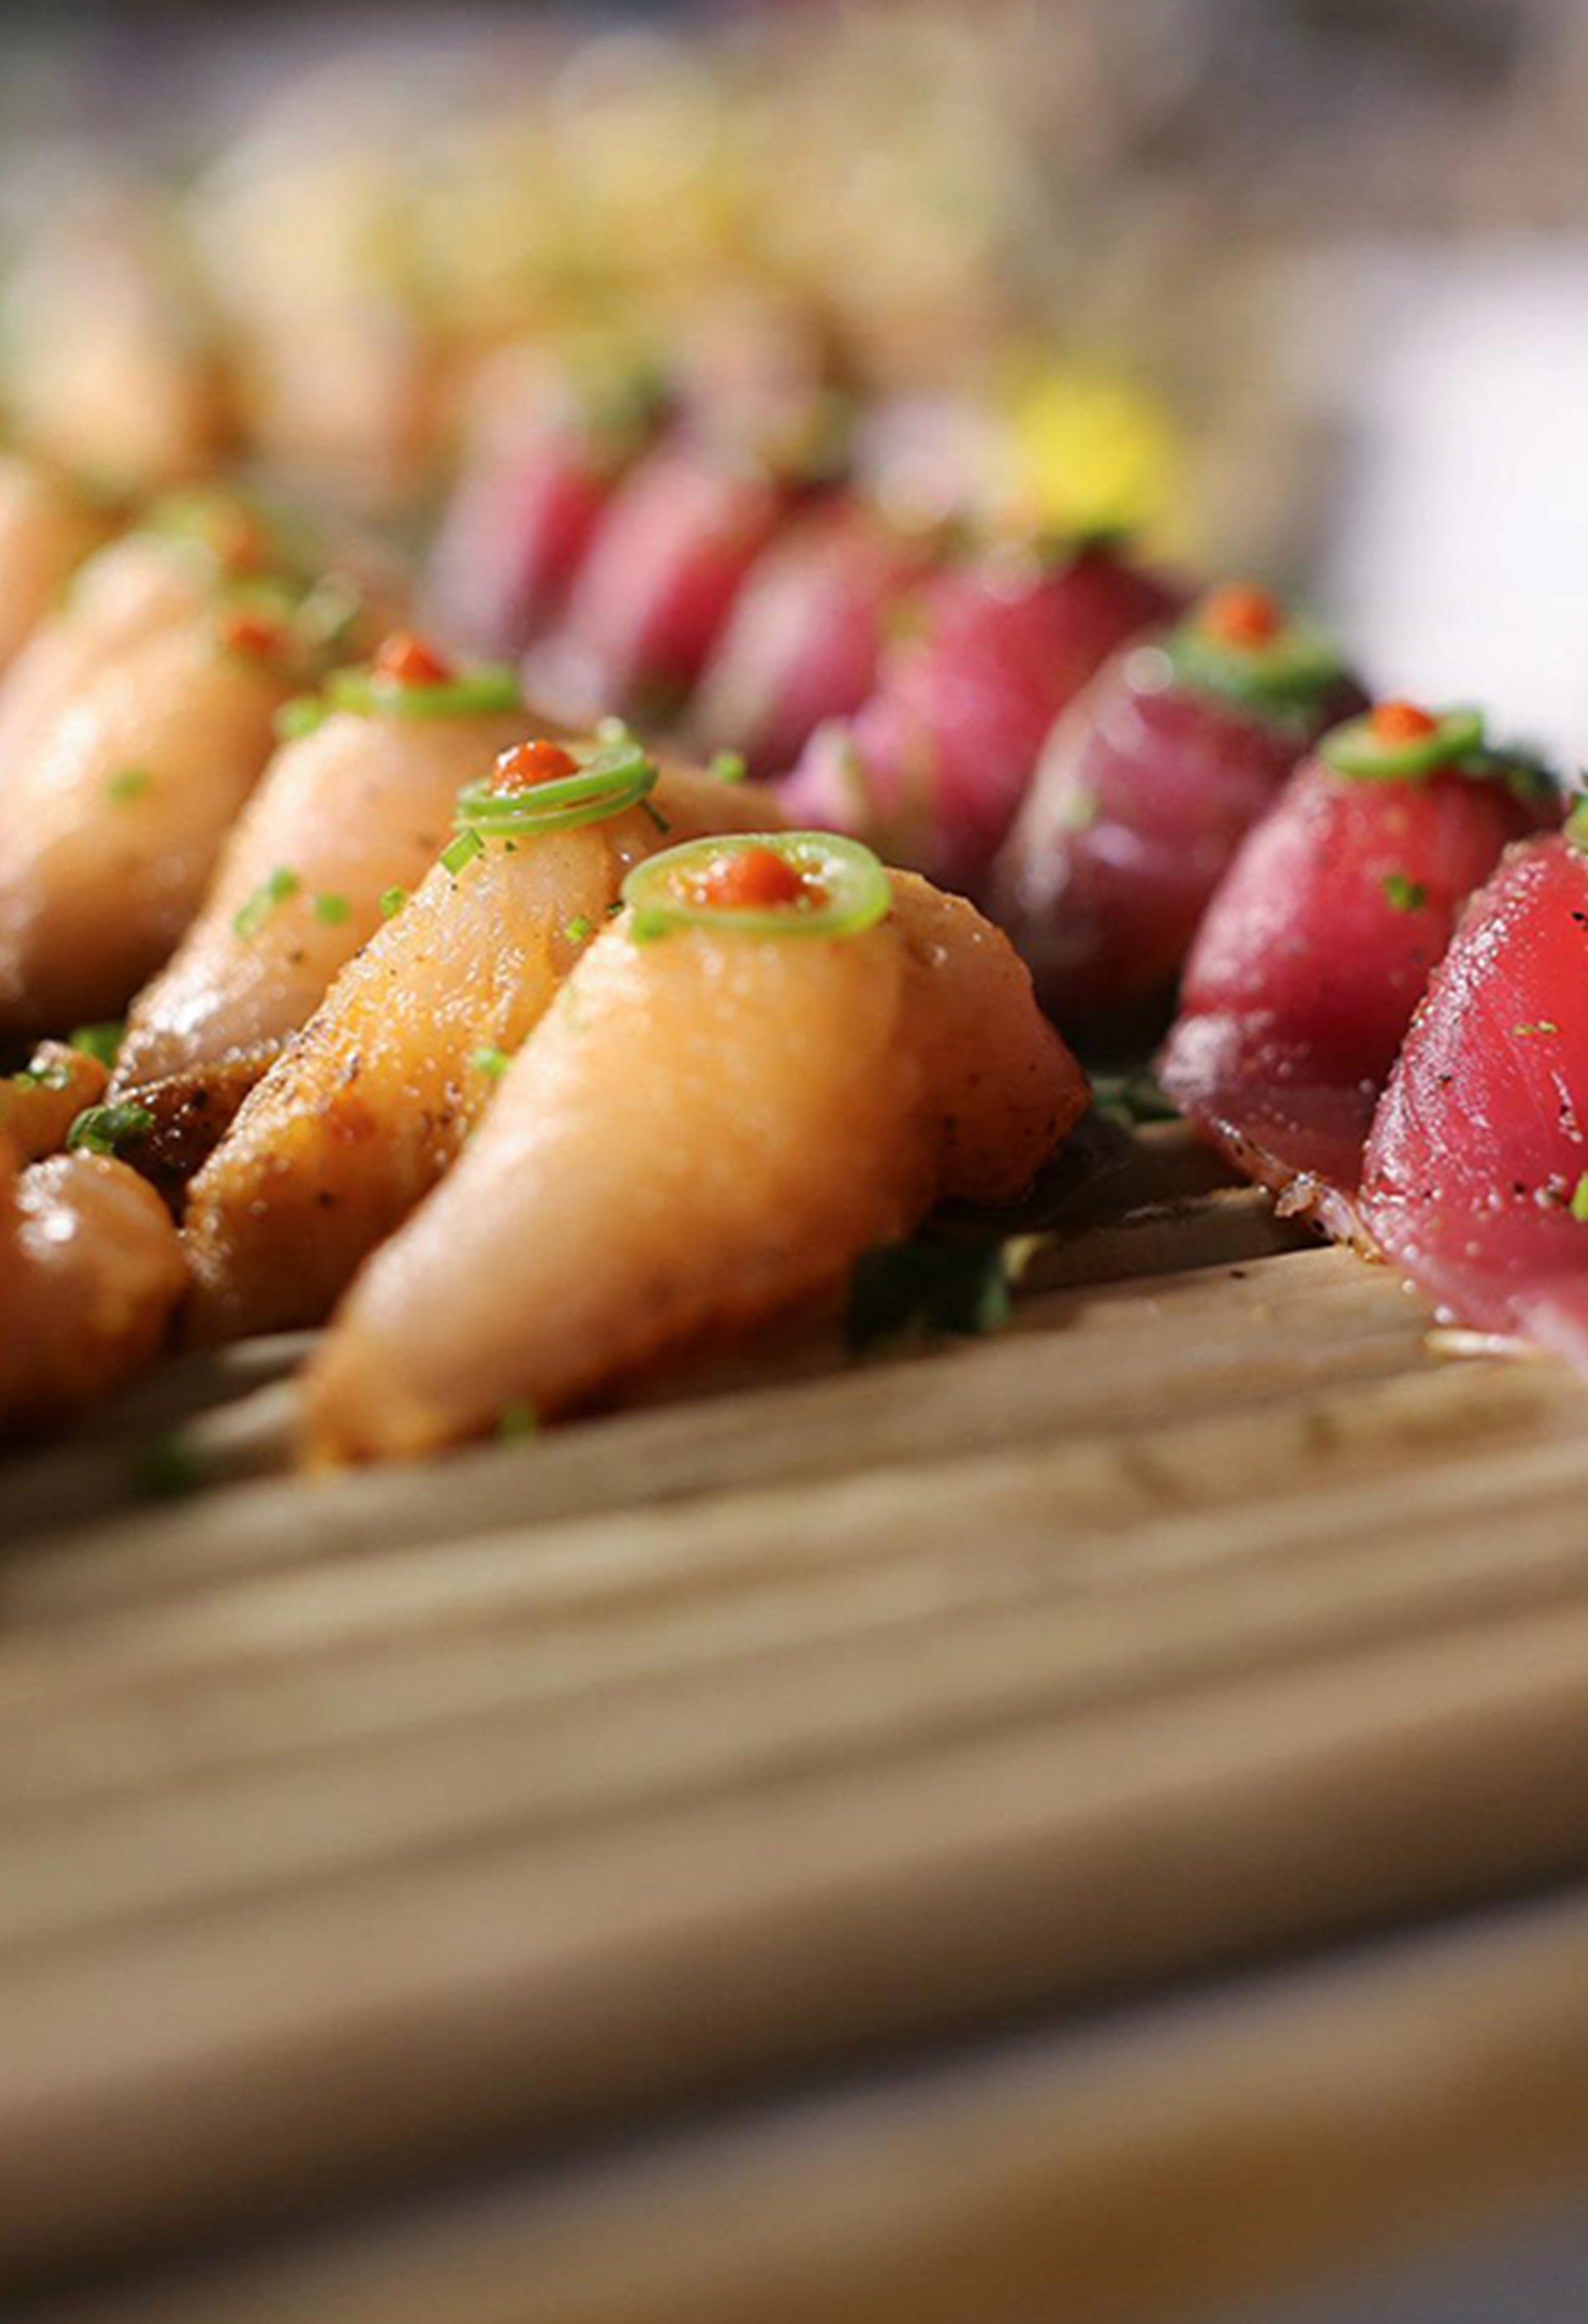 Past Catering Events with Sushi